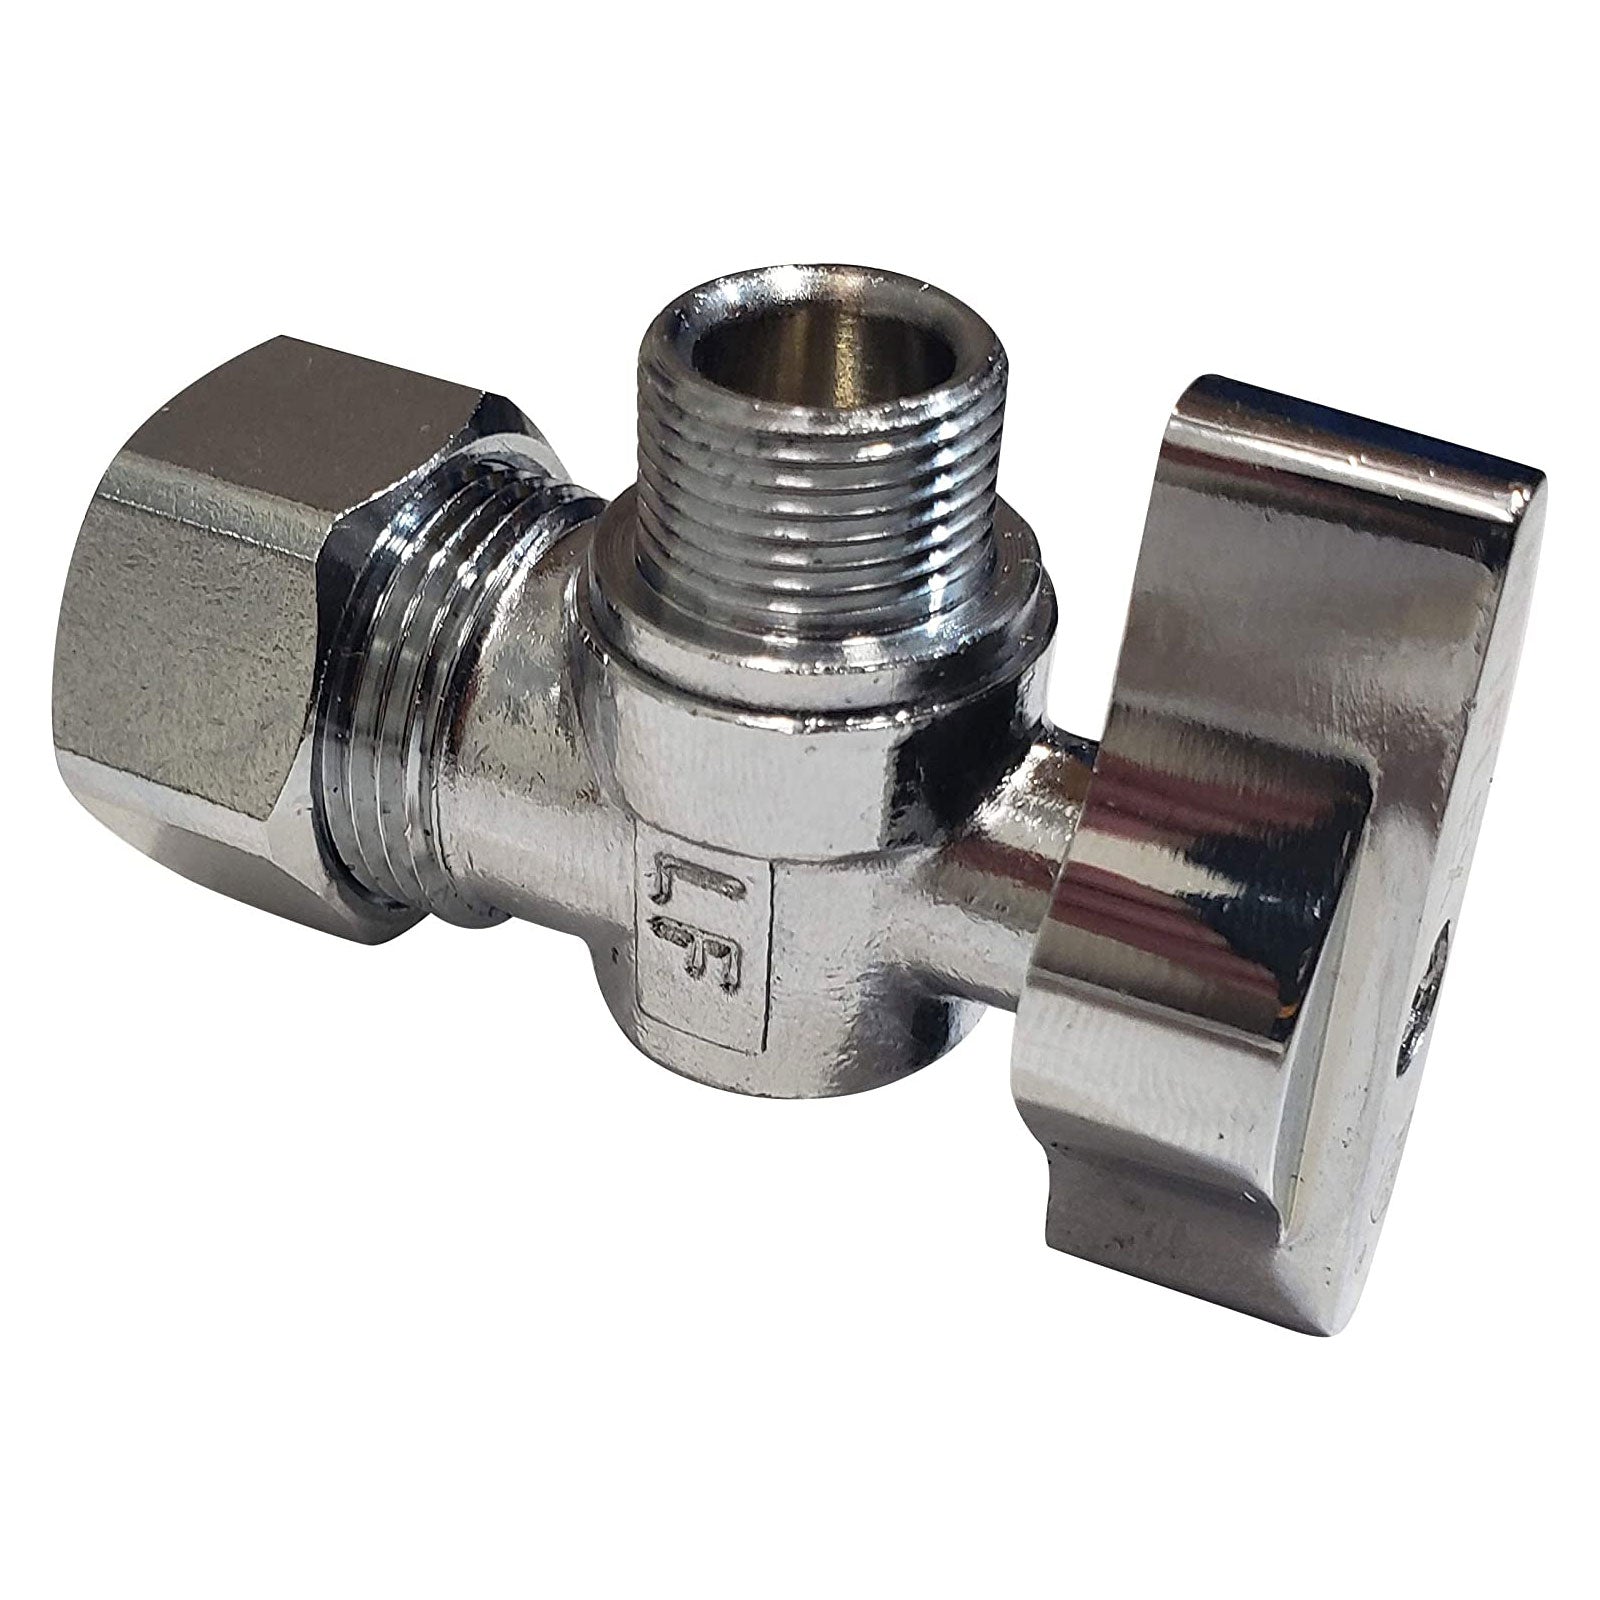 1/2" NOM (5/8" OD) x 3/8" COMP 1/4 Turn Angle Stop Valve (Less Ferrule and Nut on 1/2" COMP)